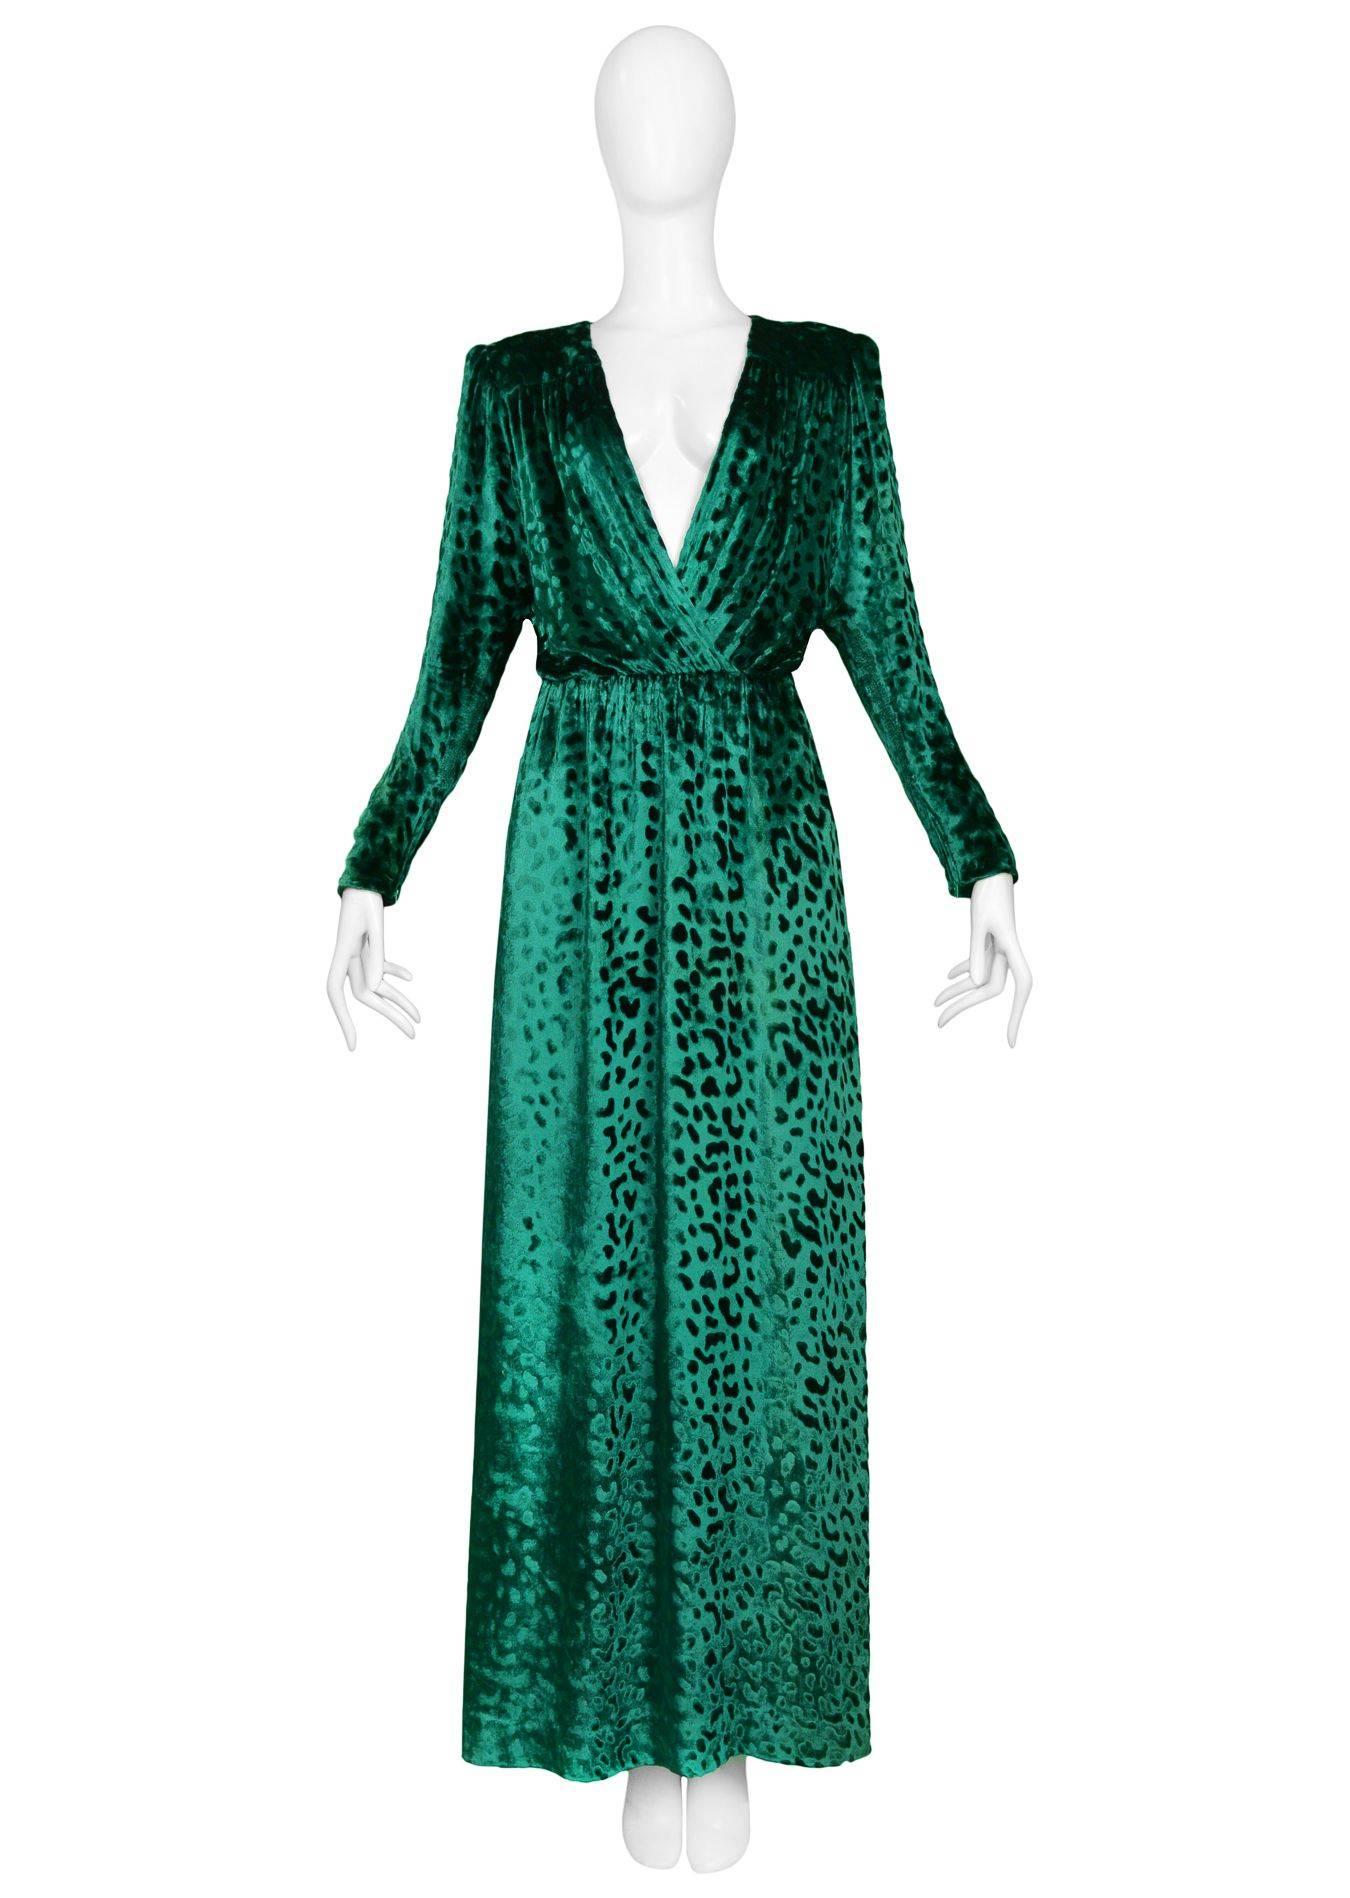 One of Yves Saint Laurent's most famous gowns as seen on Catherine Deneuve. Emerald green Yves Saint Laurent leopard velvet low cut evening gown with long sleeves and zip cuffs. Often imitated but never equalled. A must have for the YSL collector.